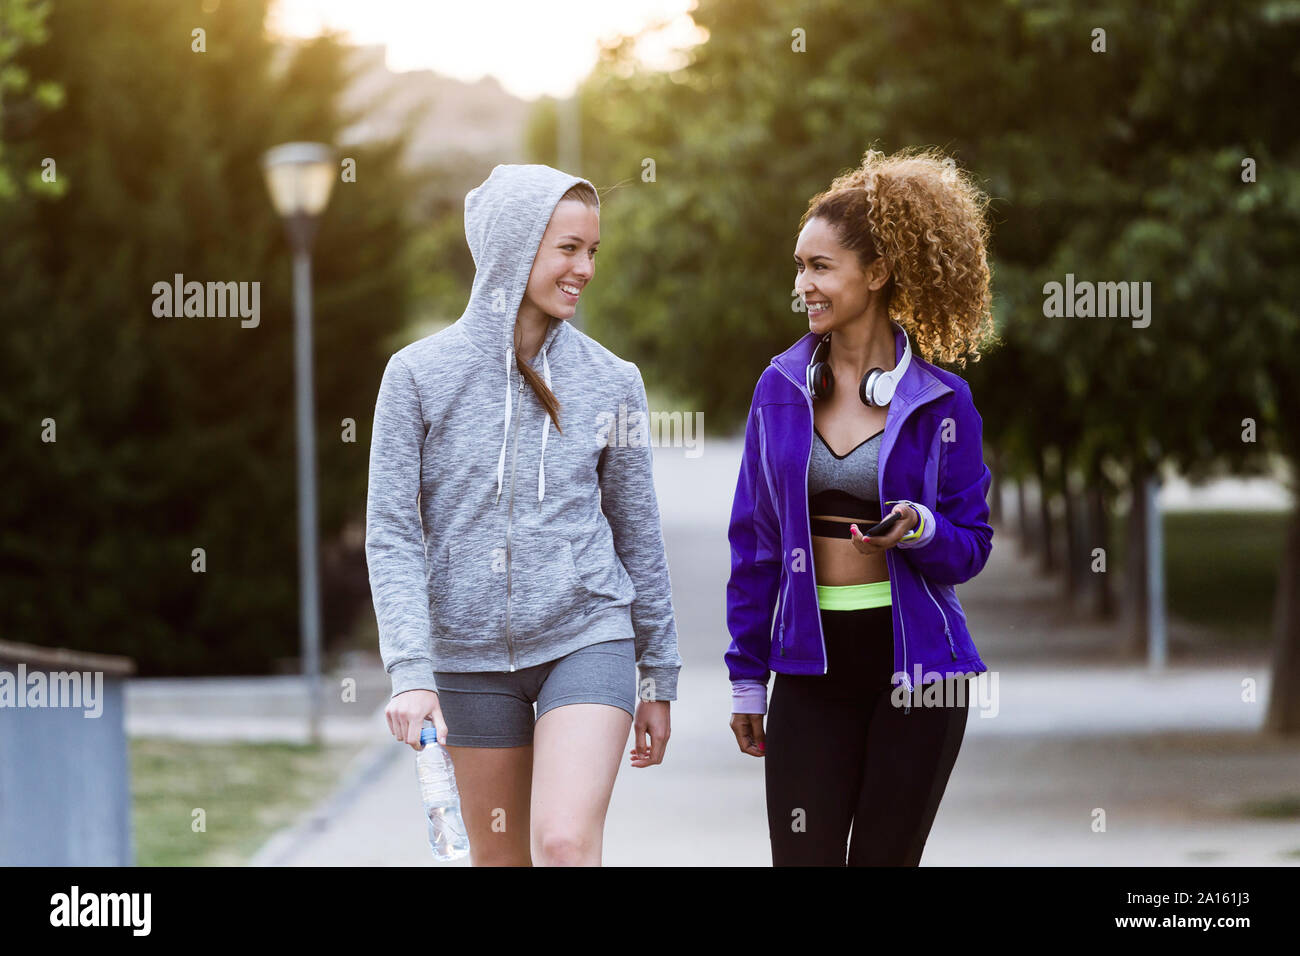 Two smiling sporty young women walking in park after workout Stock Photo